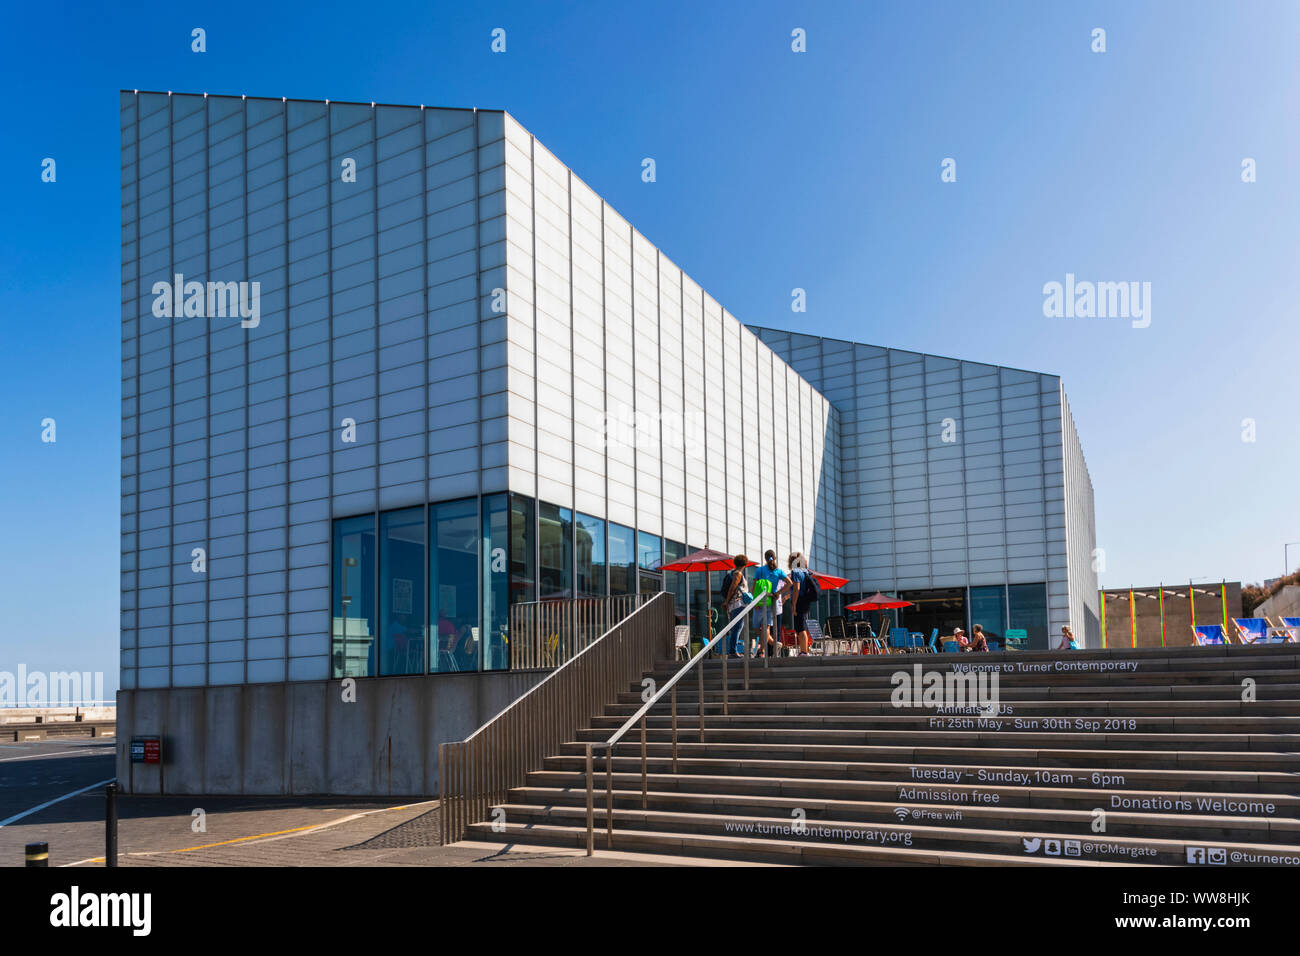 England, Kent, Thanet, Margate, The Turner Contemporary Art Gallery Stock Photo